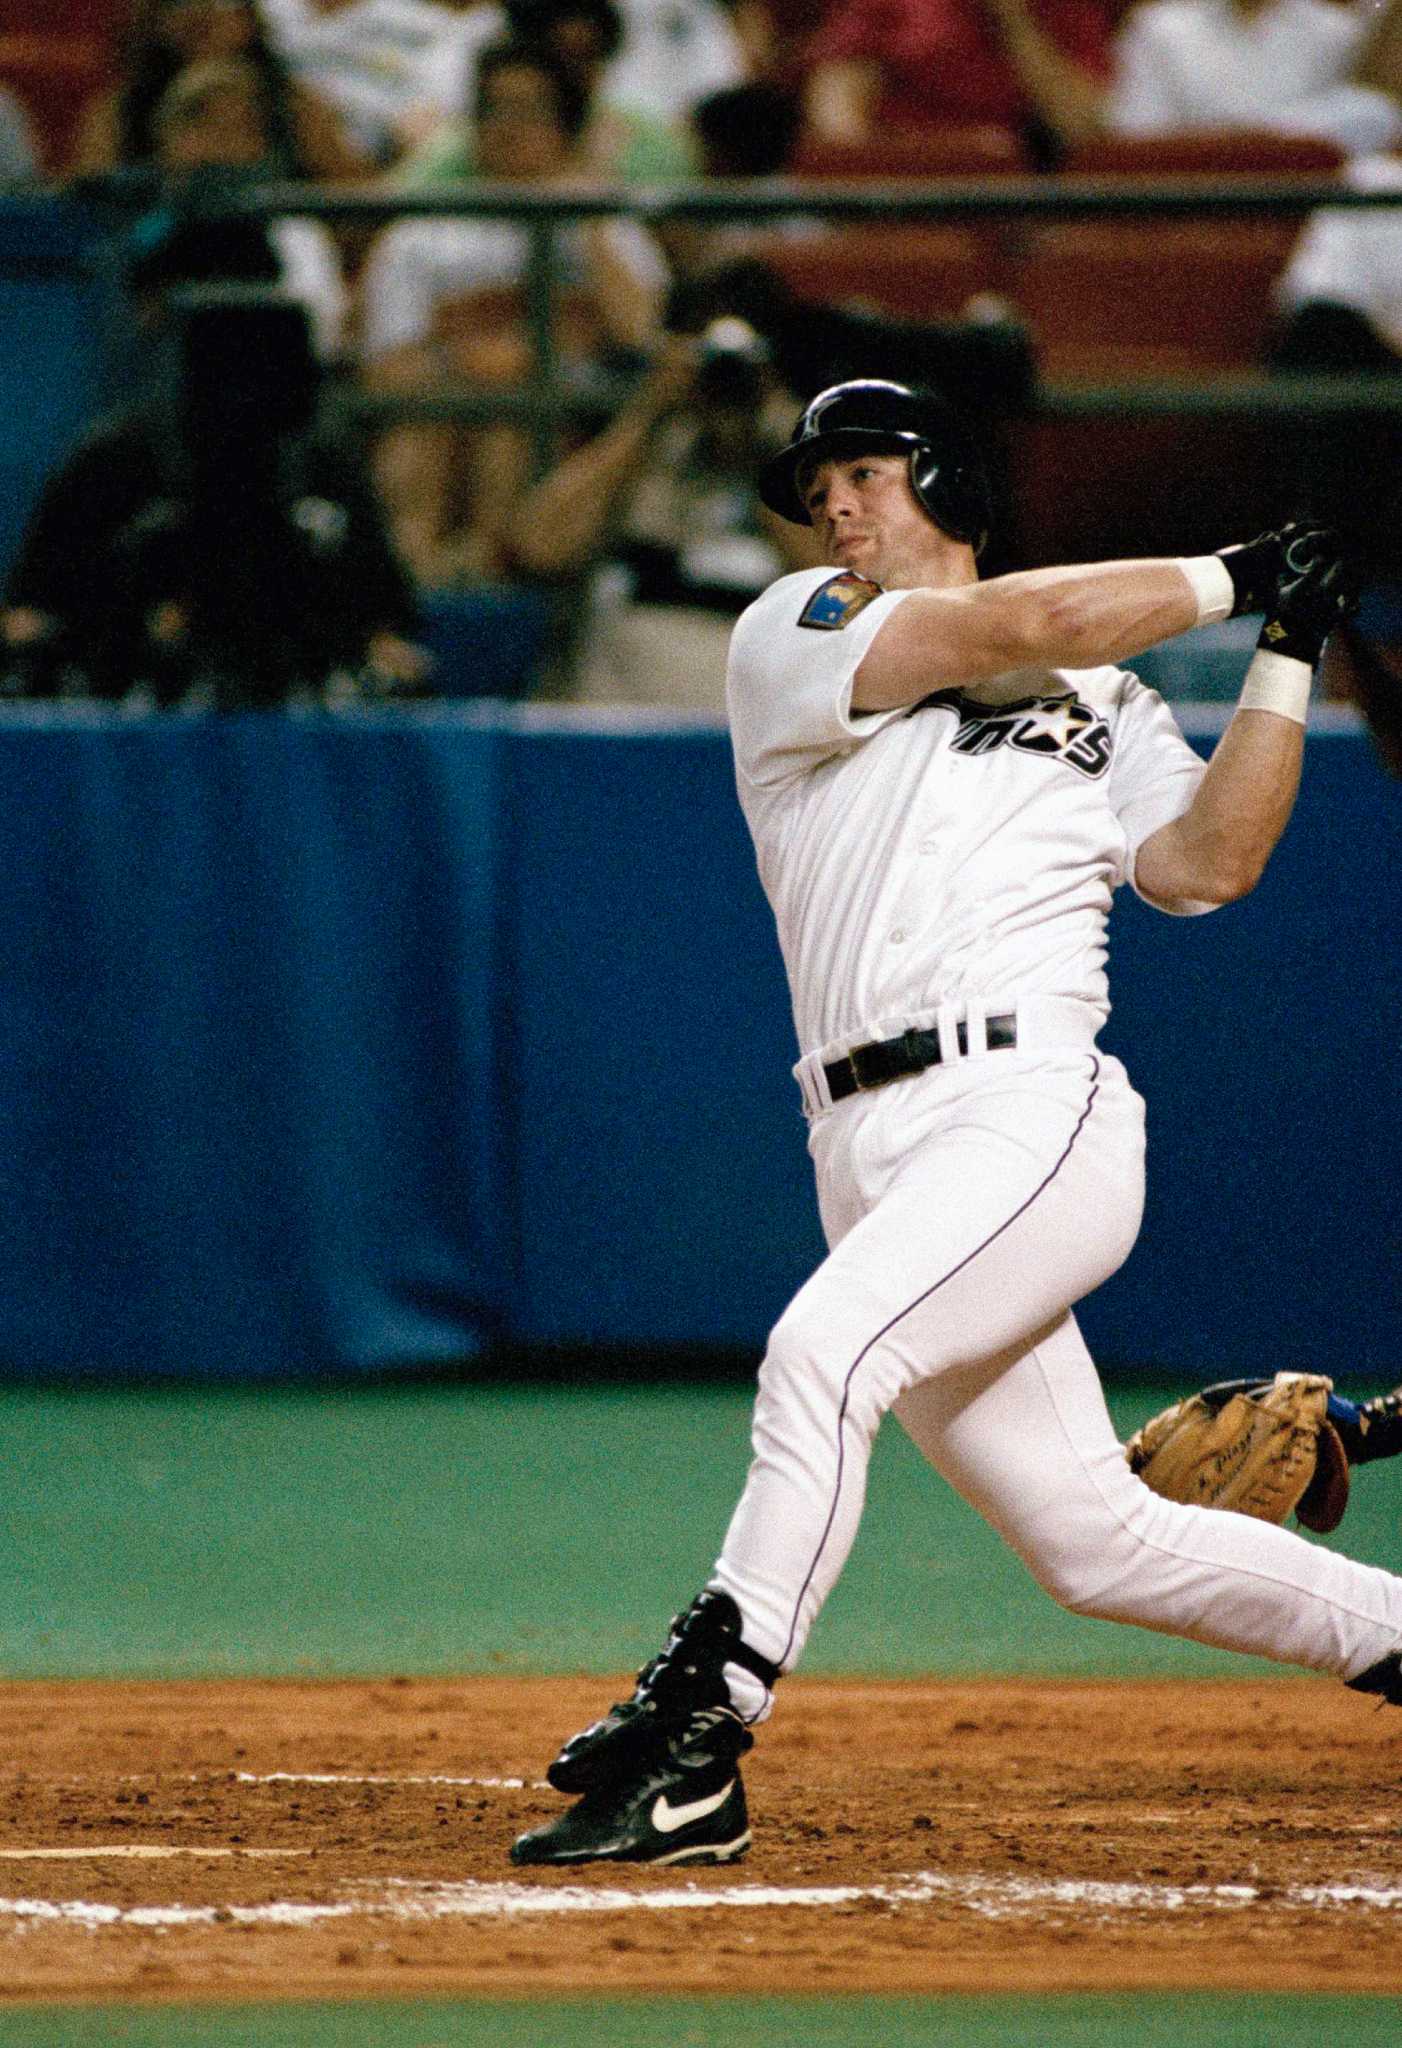 Jeff Bagwell: An all-time great batting eye - A Very Simple Game